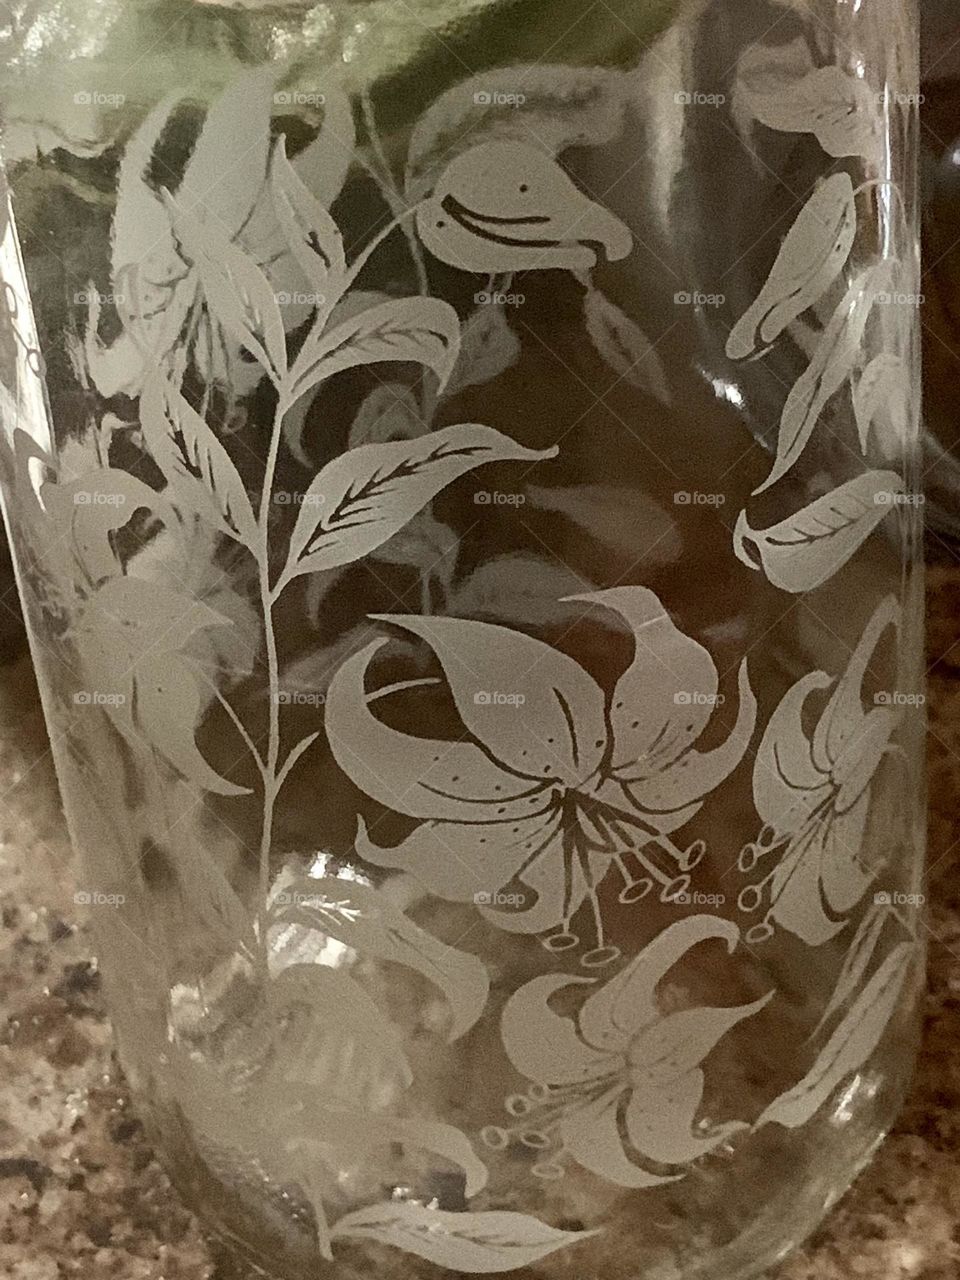 Etched glass 